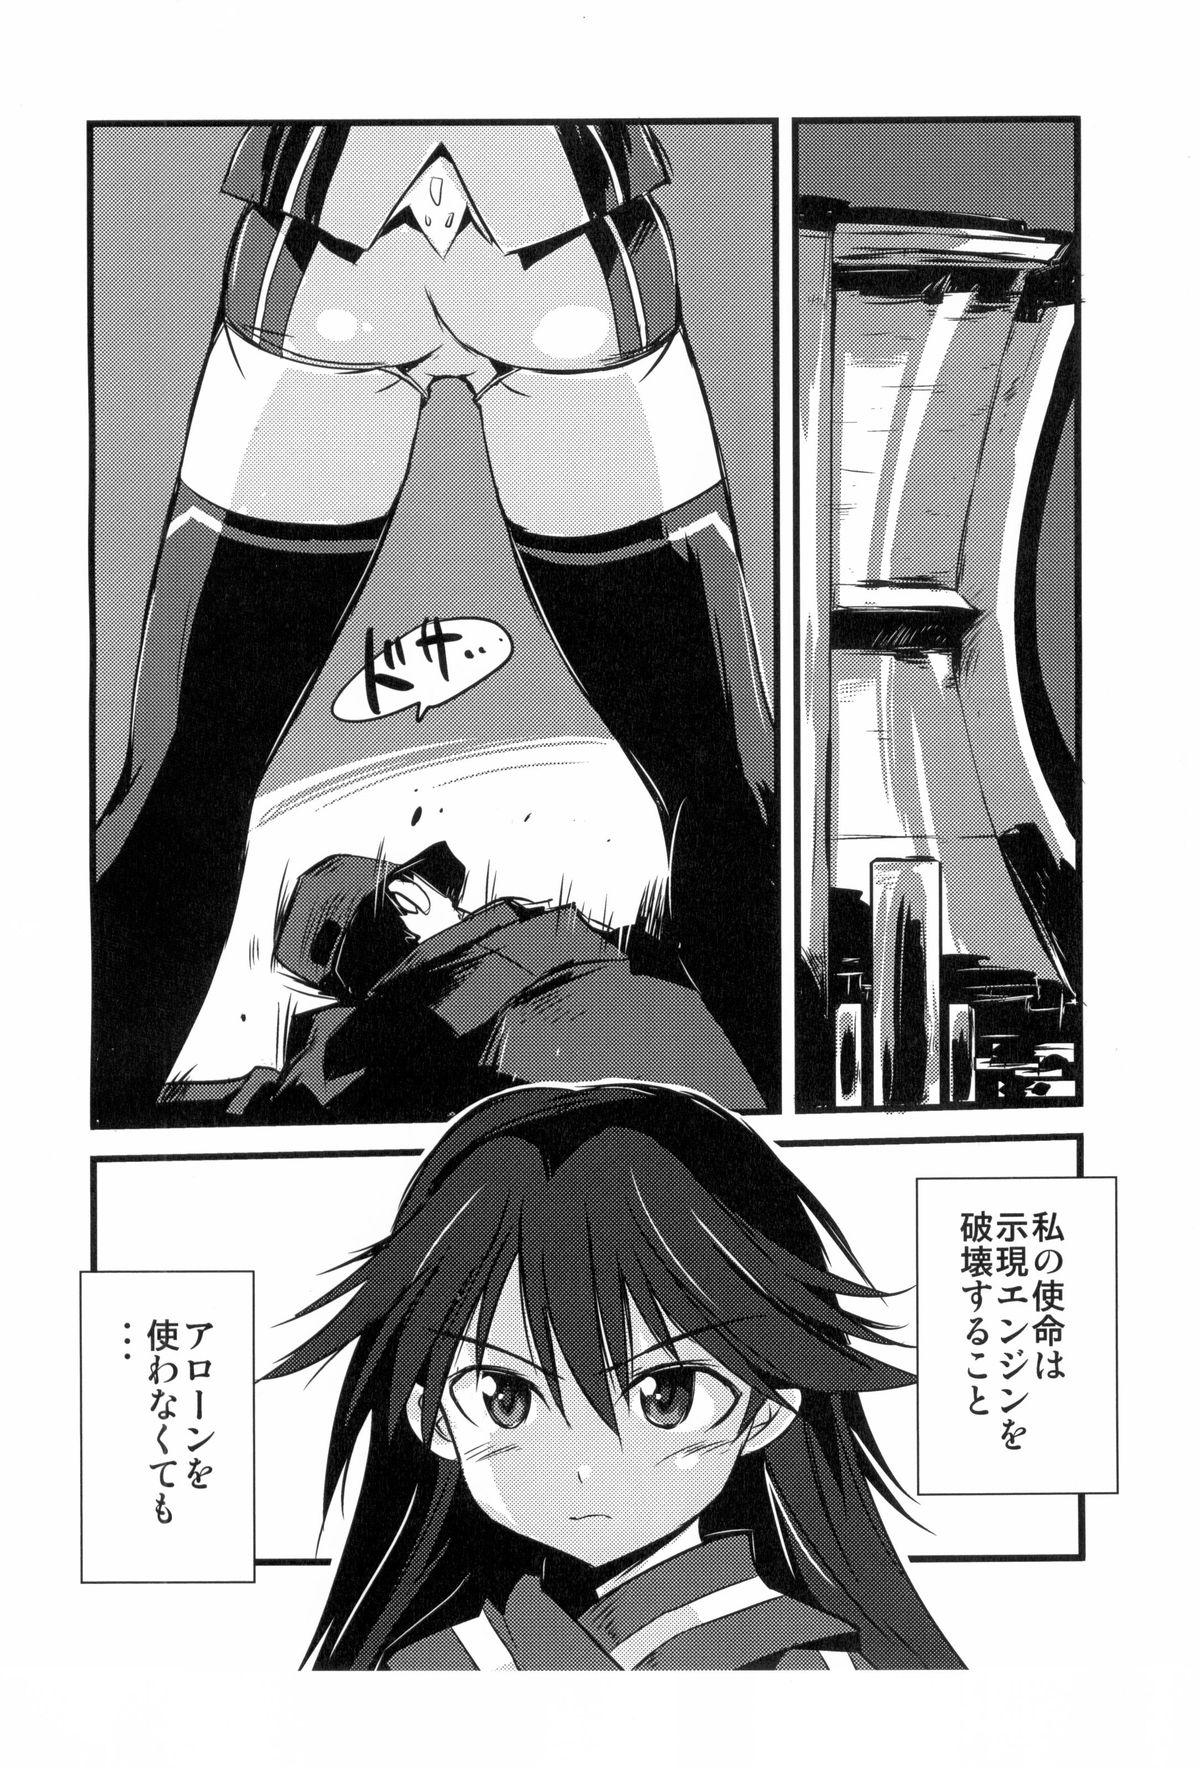 Xxx operation 0 - Vividred operation 3some - Page 4